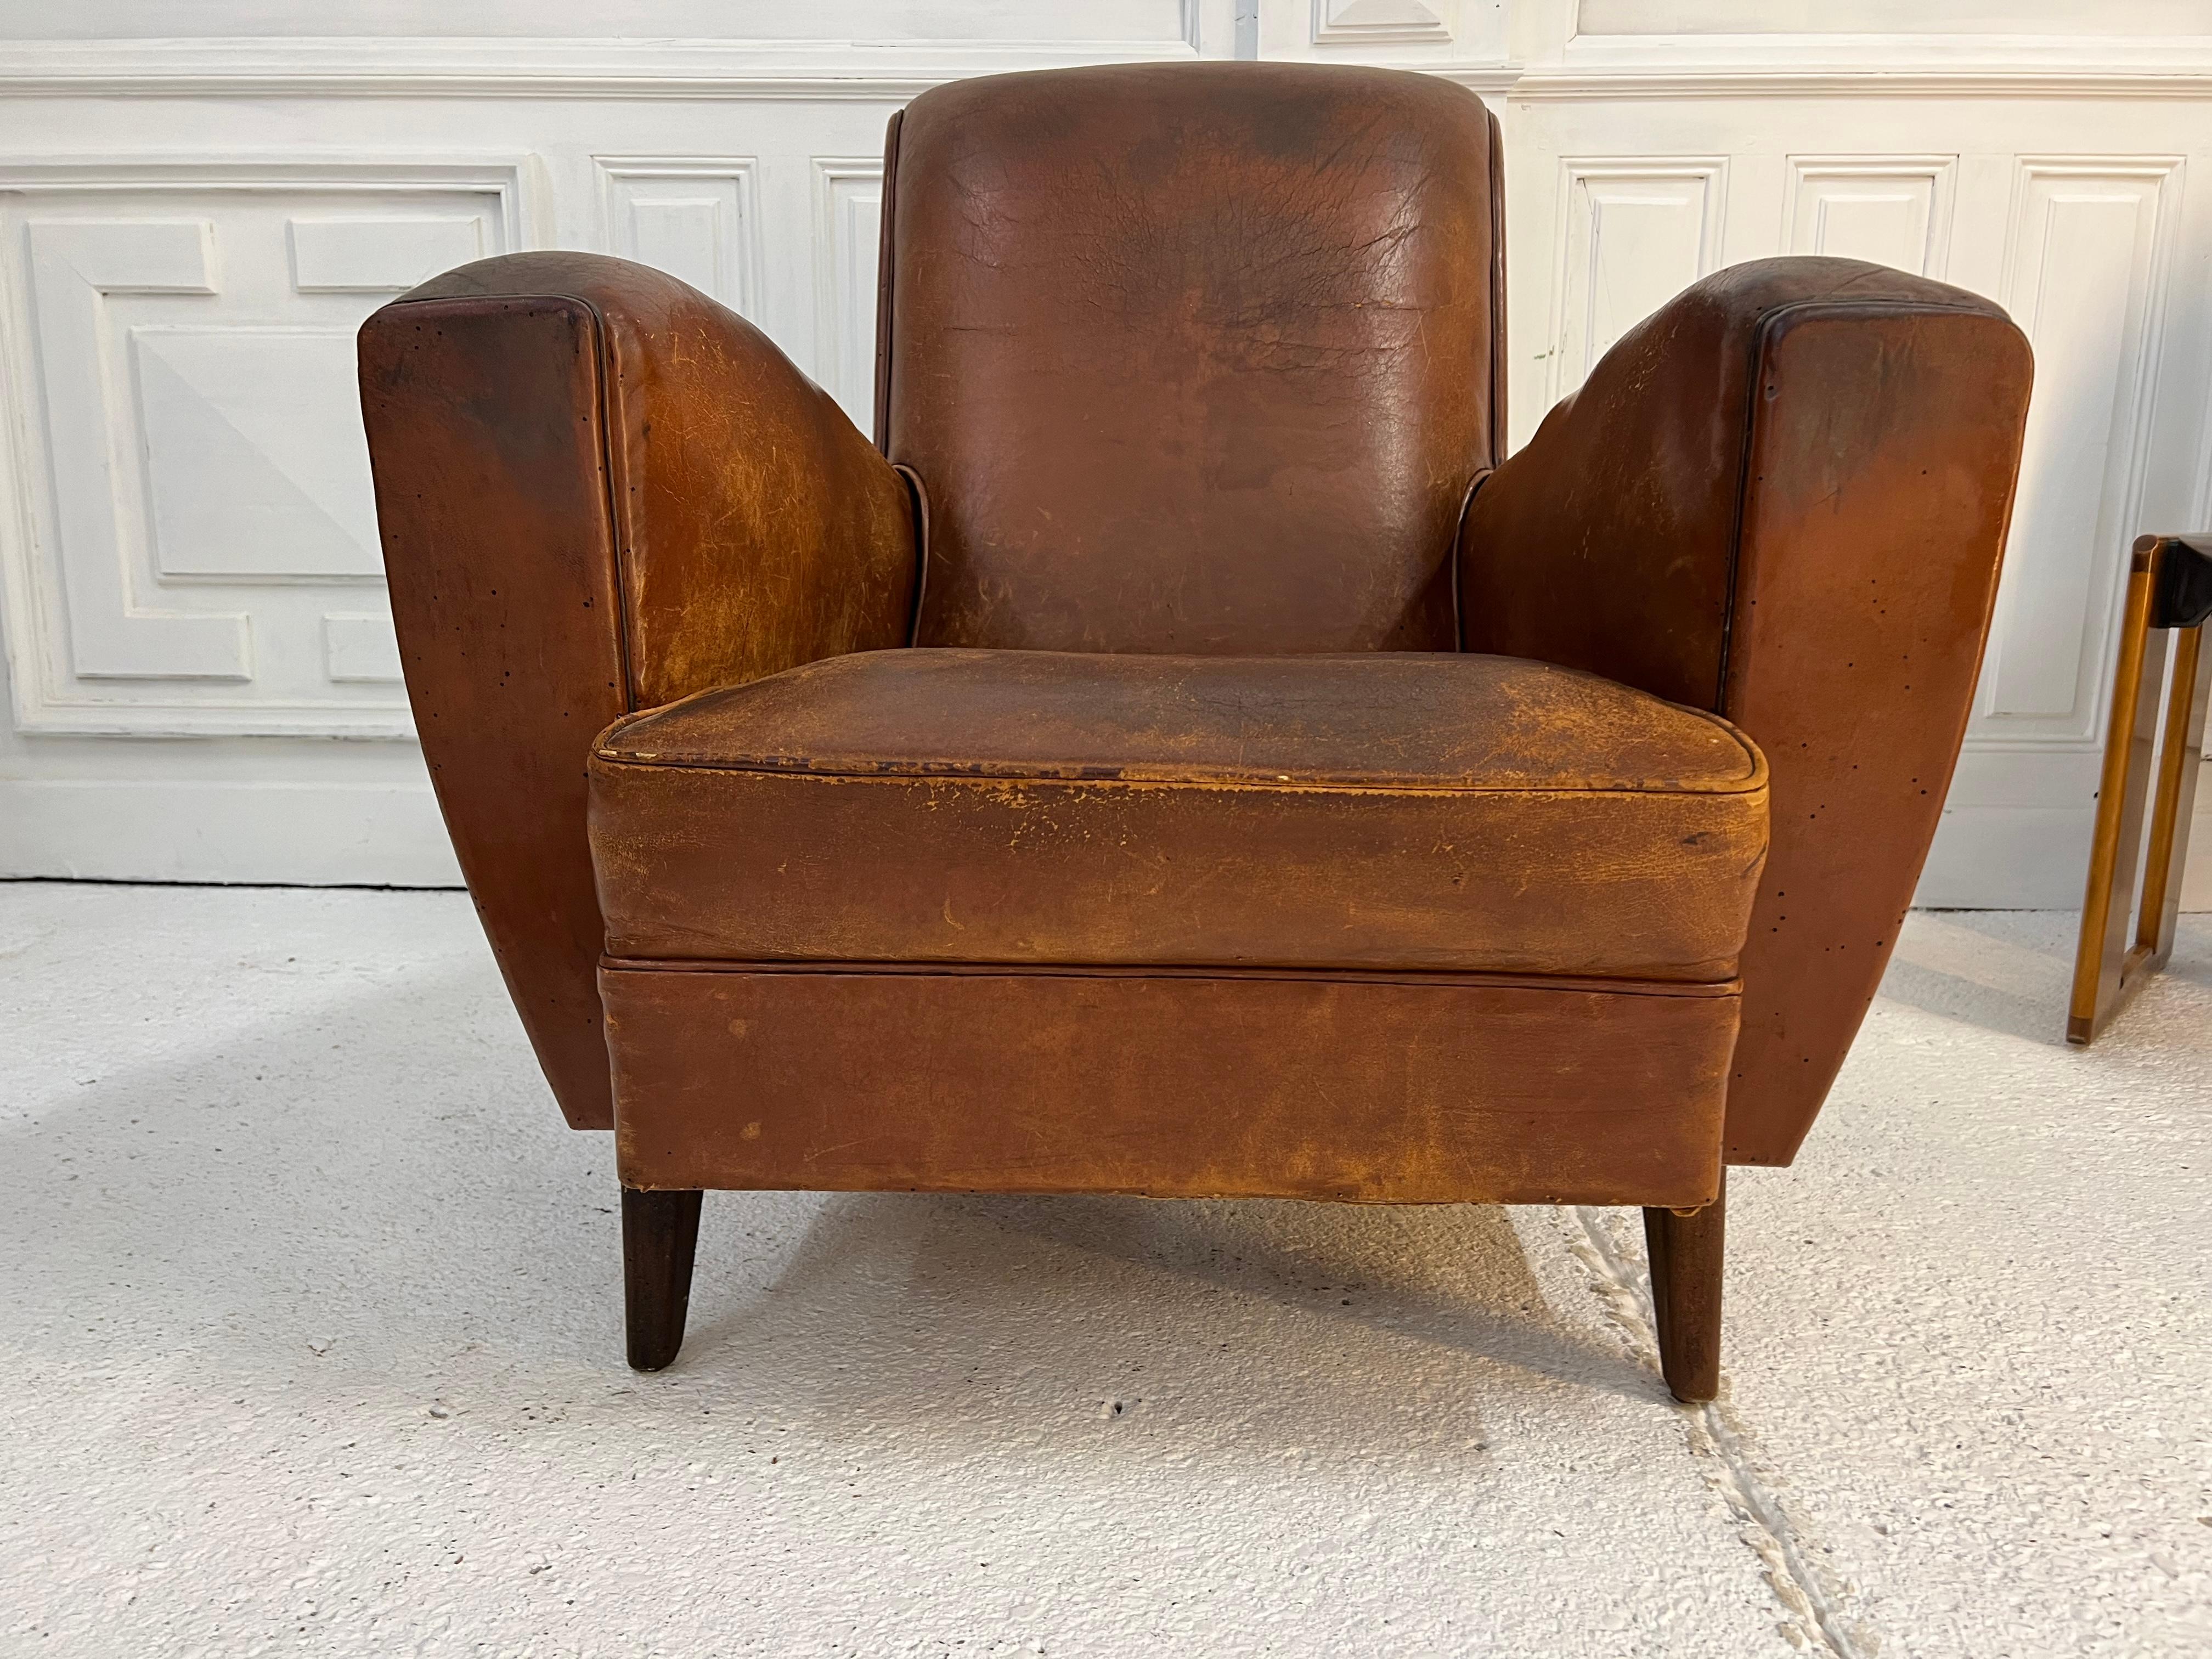 Leather club chair from the 50s/60s in its beautiful original condition
Its style and comfort will make this armchair an important piece in your interior
The club chair was traditionally intended for cigar smoking lounges, the gentlemen's